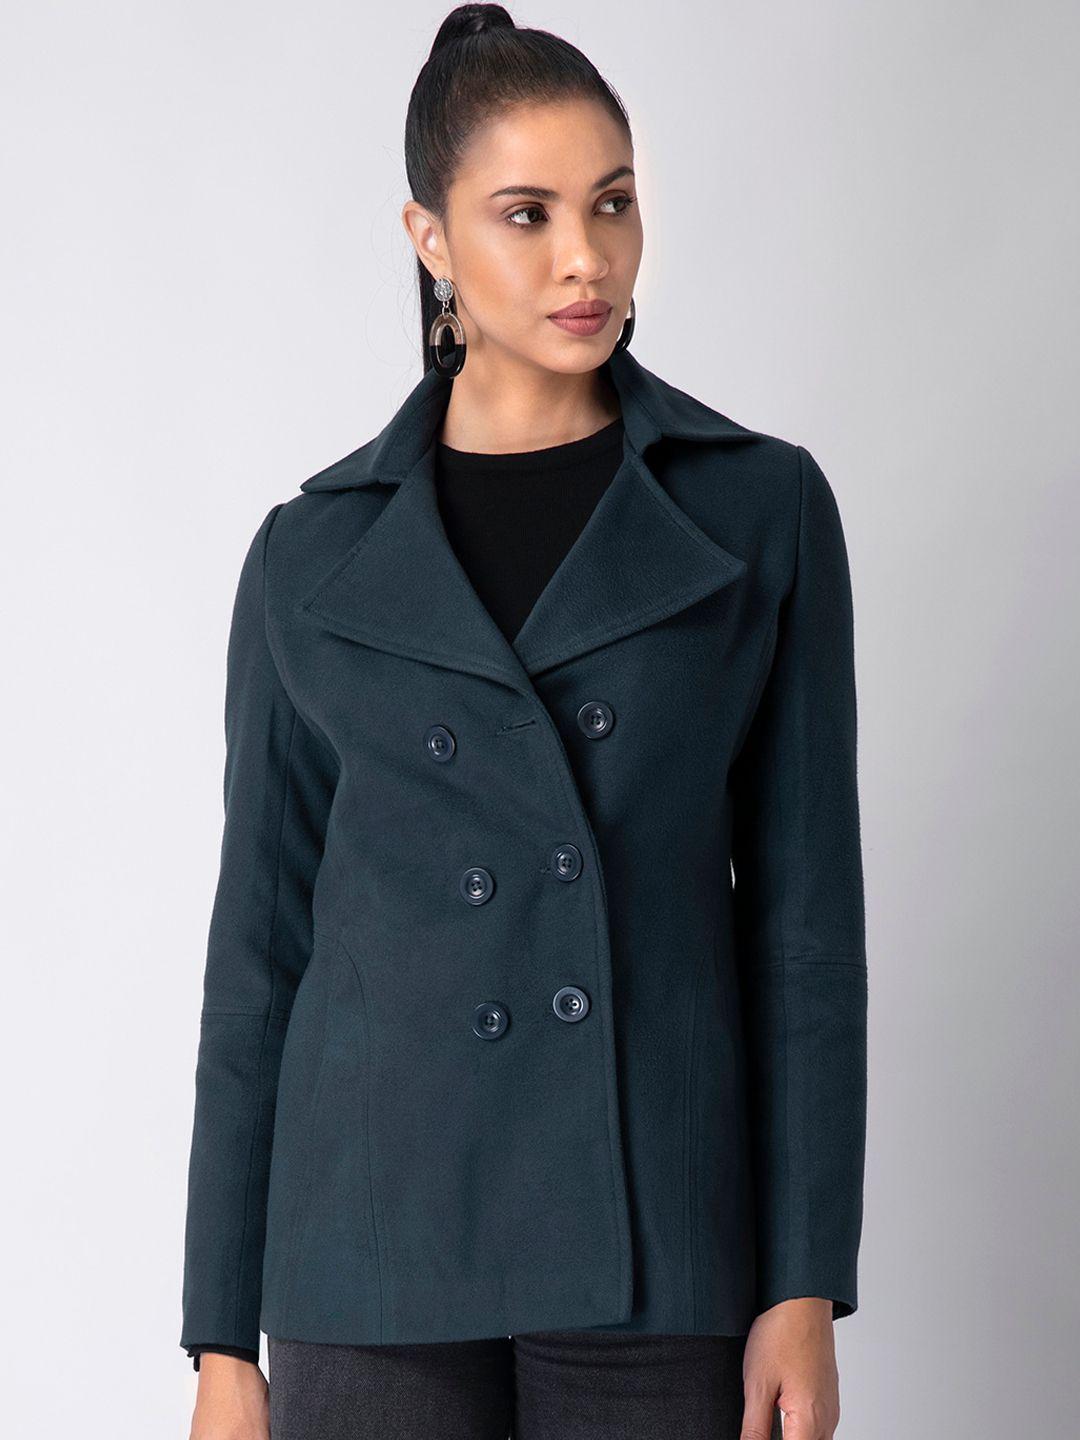 faballey women teal blue coloured solid double-breasted trench coat